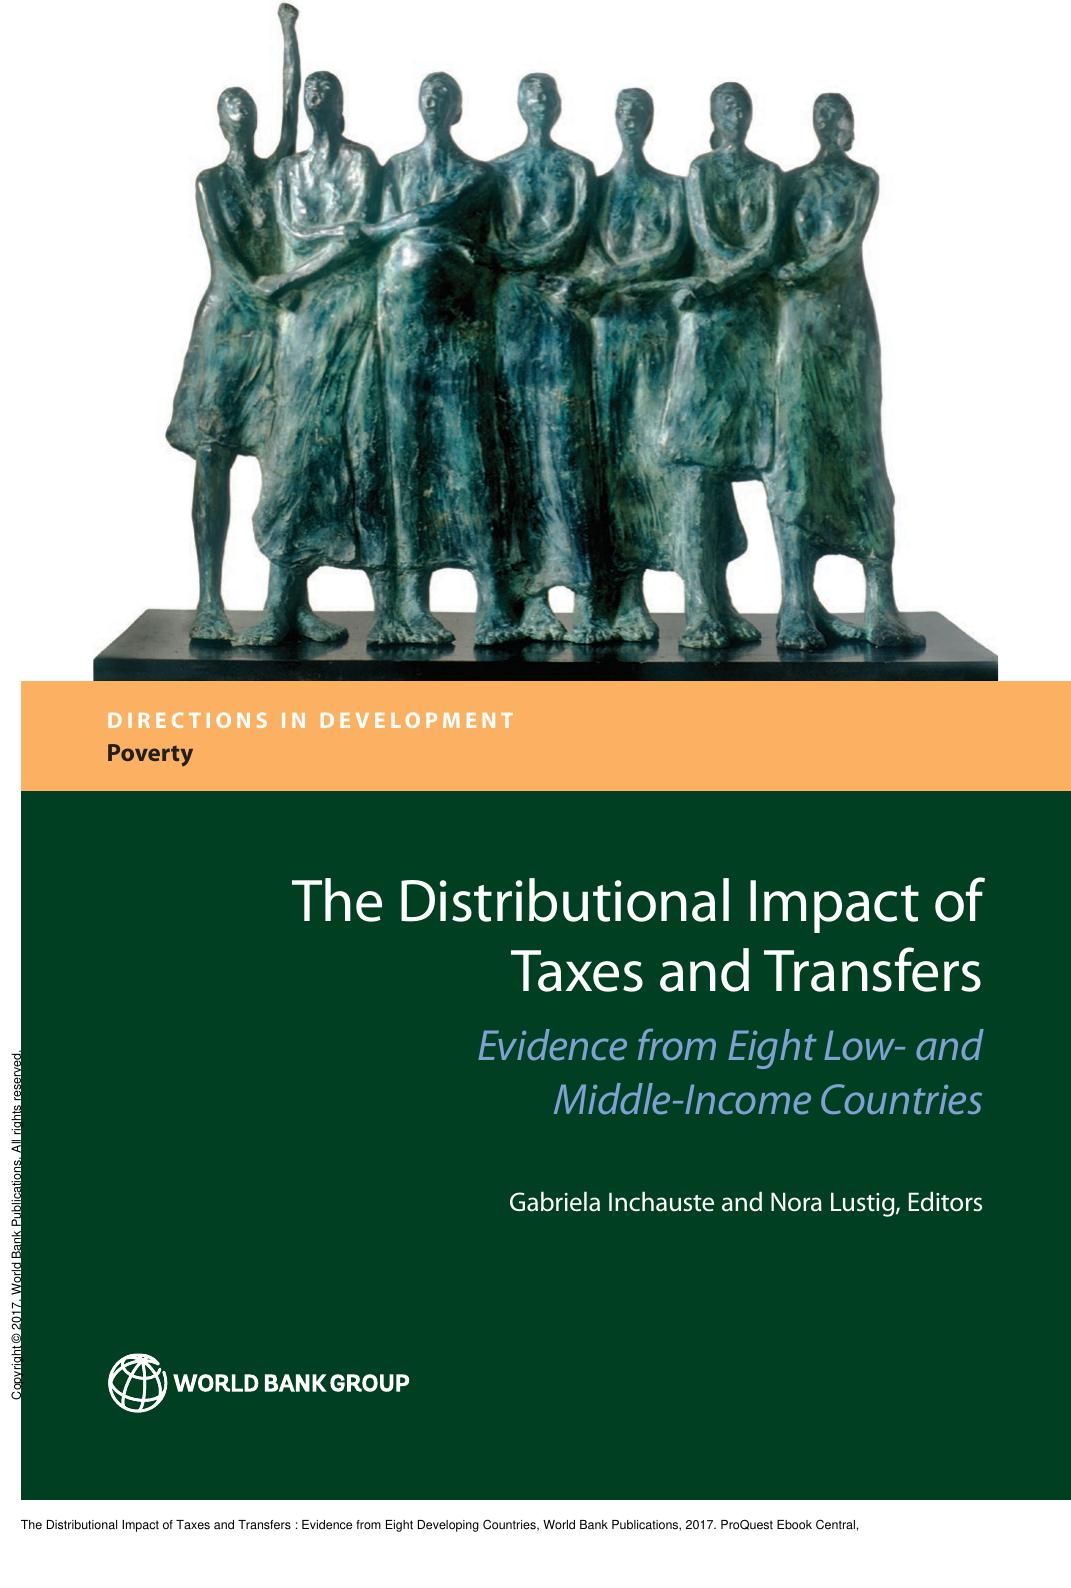 The Distributional Impact of Taxes and Transfers : Evidence from Eight Developing Countries by Gabriela Inchauste; Nora Lustig